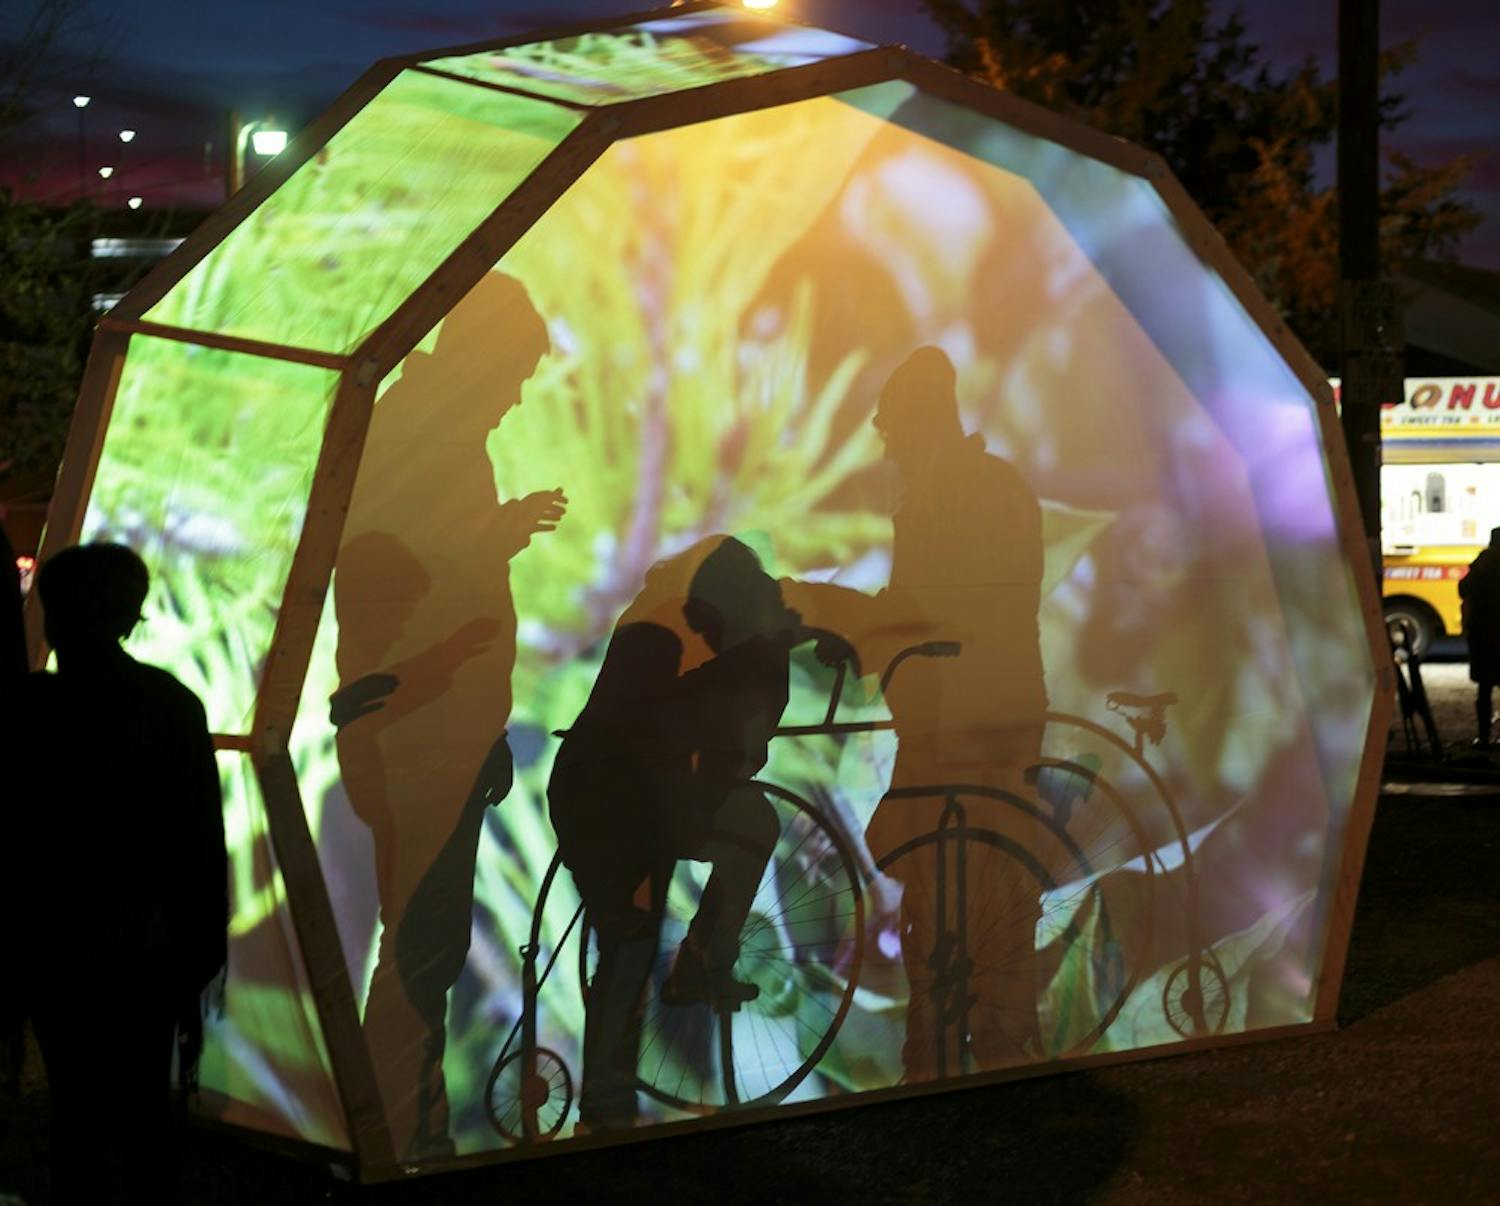 Carrboro hosted Shimmer, a one-night art exhibition centered around light, on Friday night.